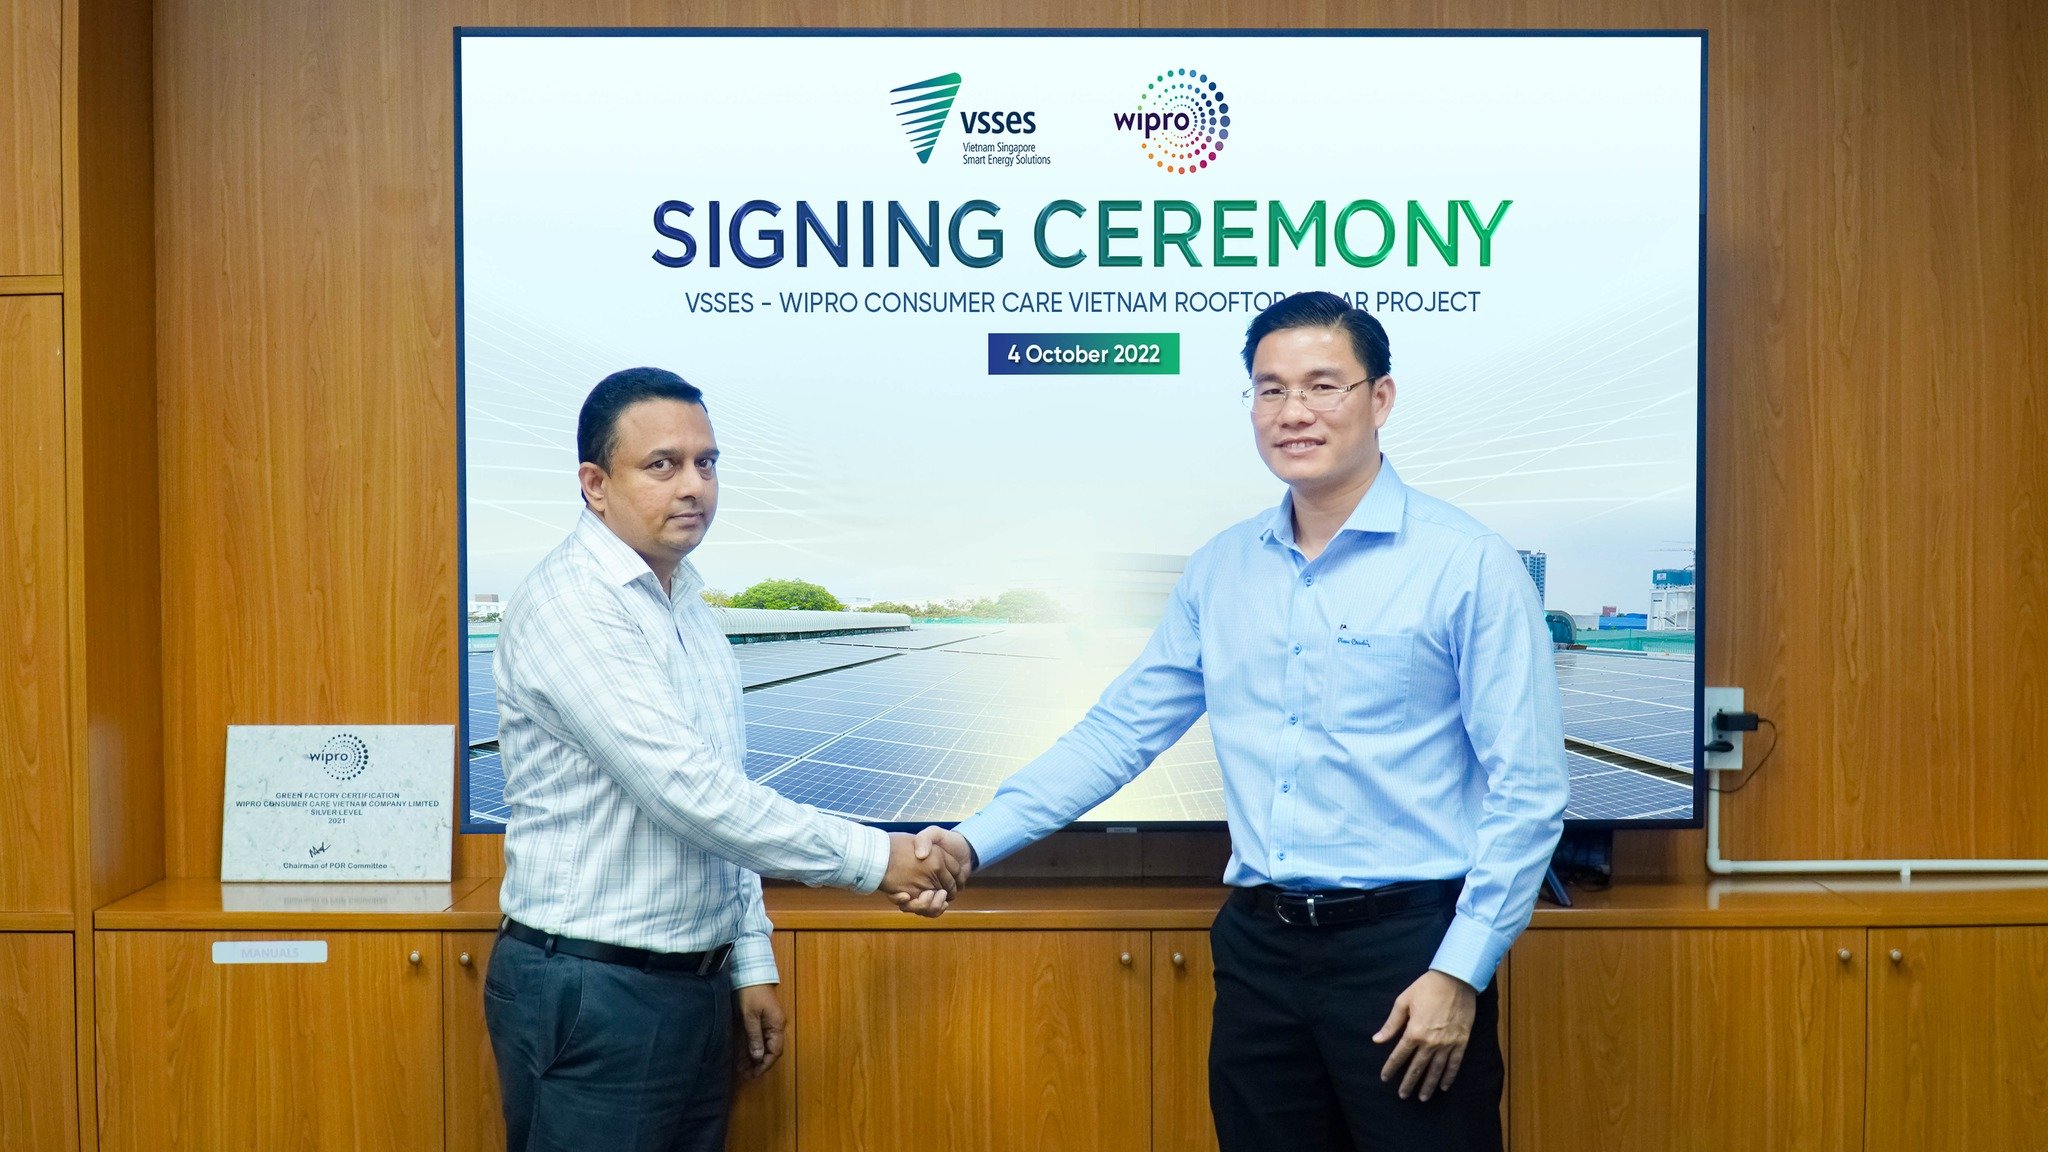 VSSES and Wipro Consumer Care Vietnam embarked on a 465 kWp rooftop solar power project